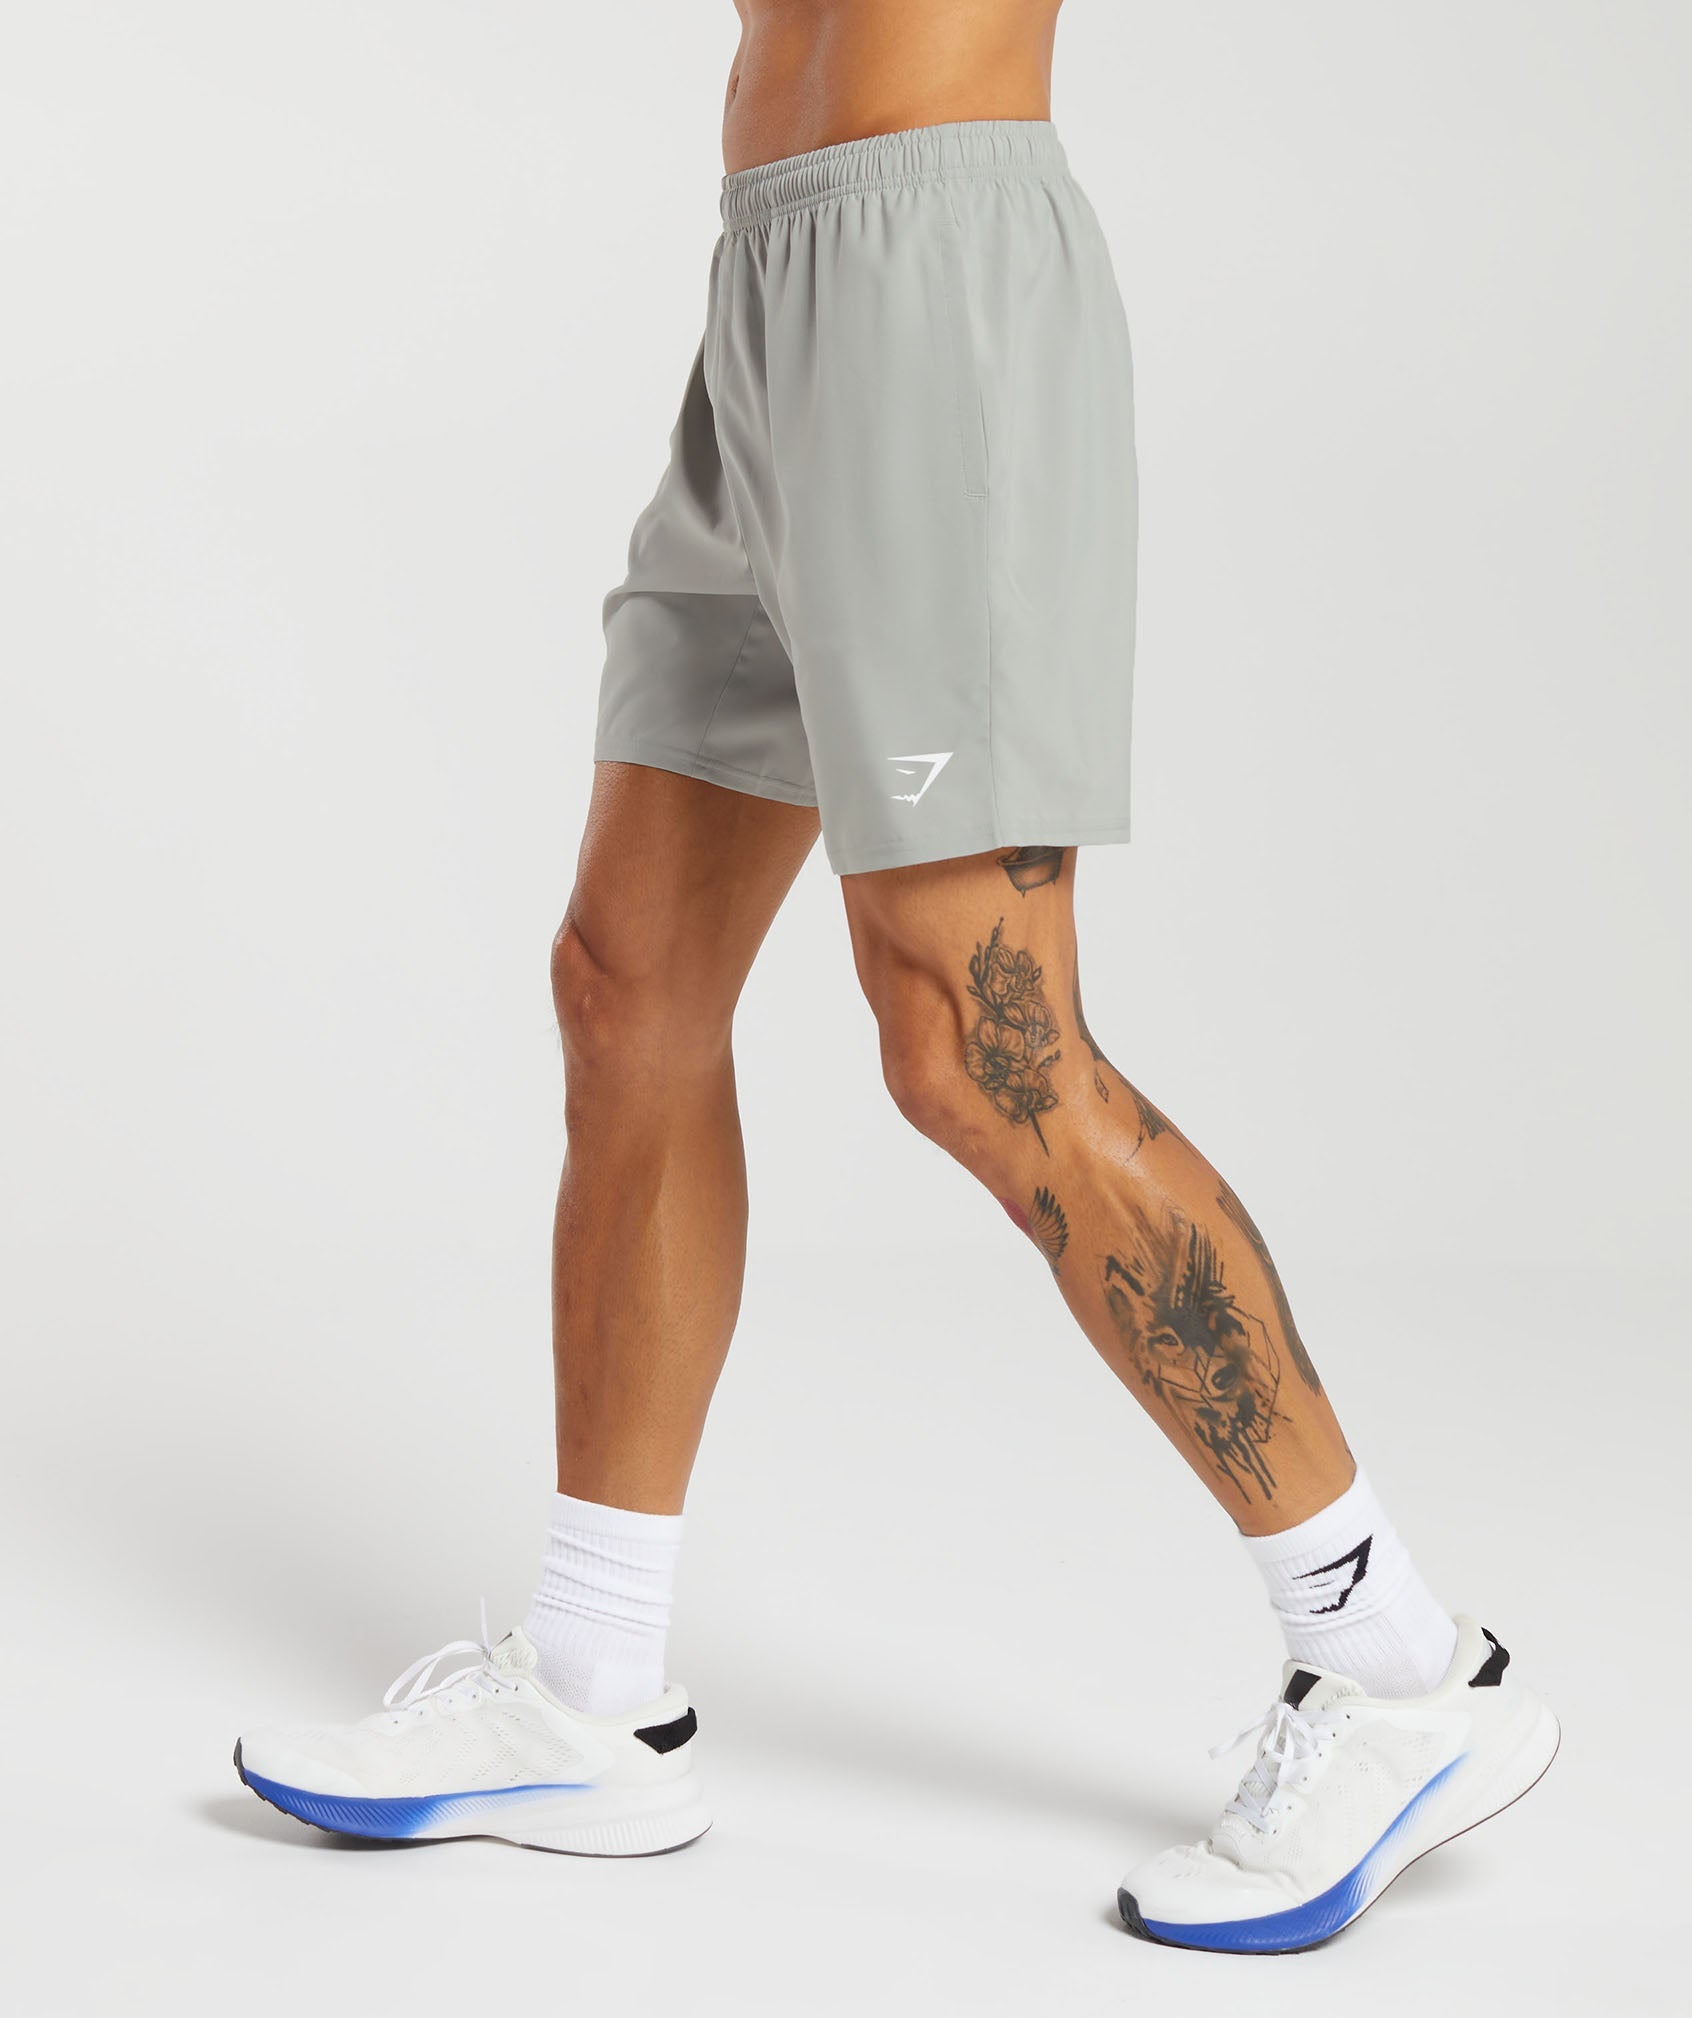 Arrival 7" Shorts in Stone Grey - view 3